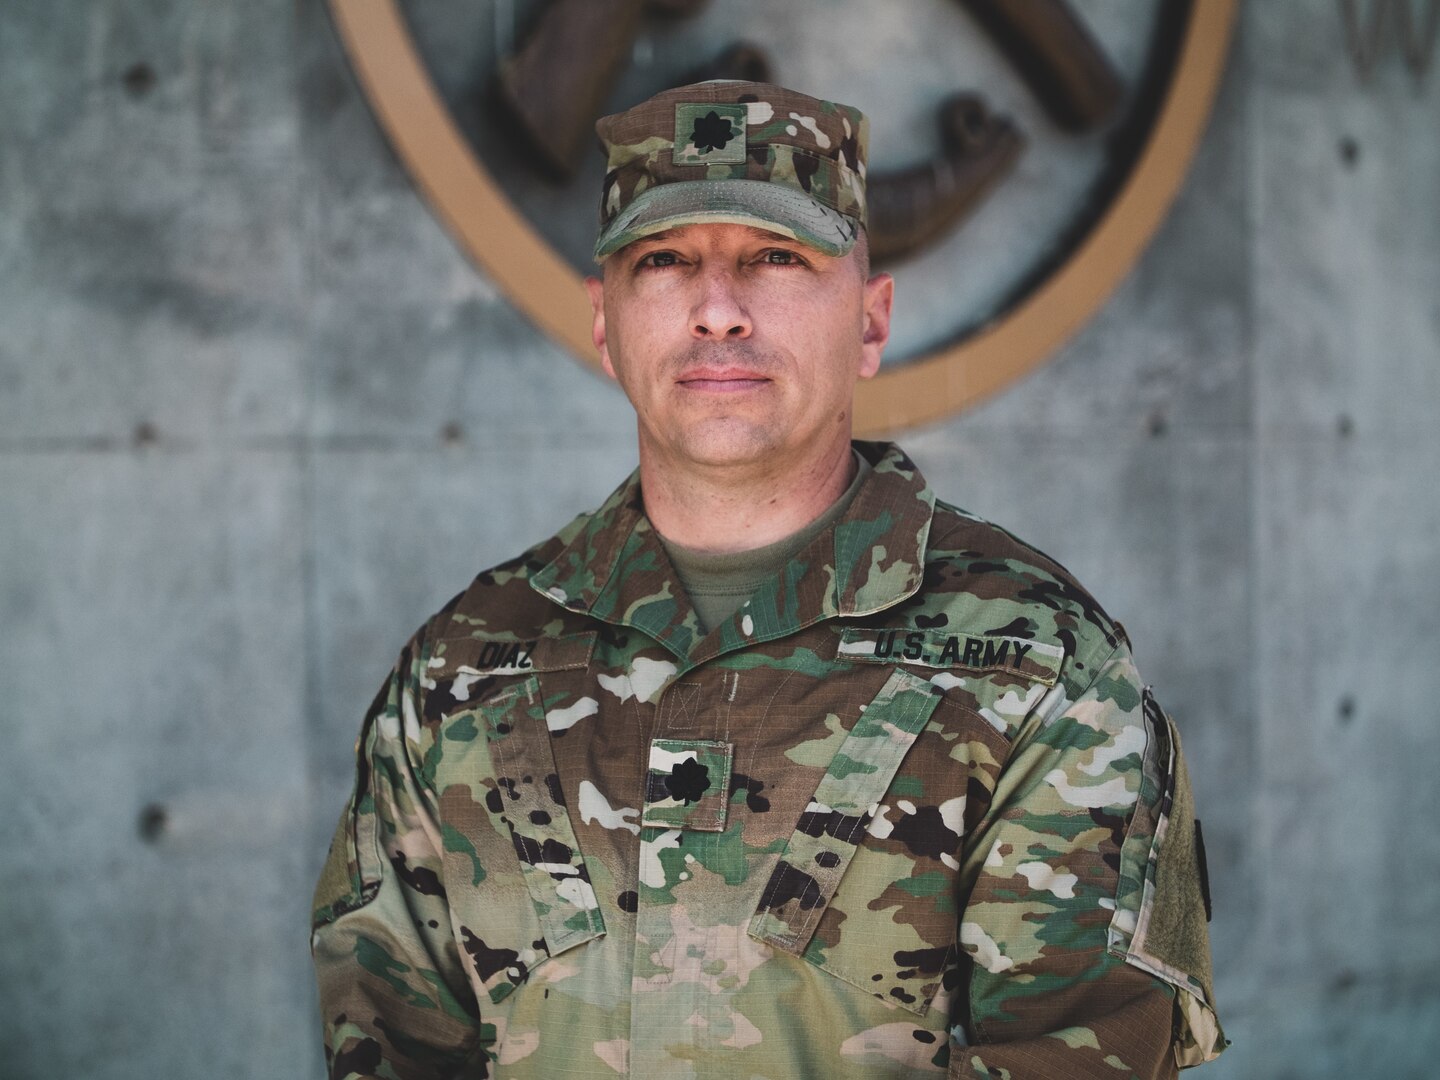 Lt. Col. Jason Diaz poses for a photo at Camp Dawson, West Virginia. Diaz is an armor officer with the 1st Squadron, 150th Cavalry Regiment and has been in the West Virginia National Guard since 2002. (U.S. Army National Guard photo by Sgt. Davis Rohrer)